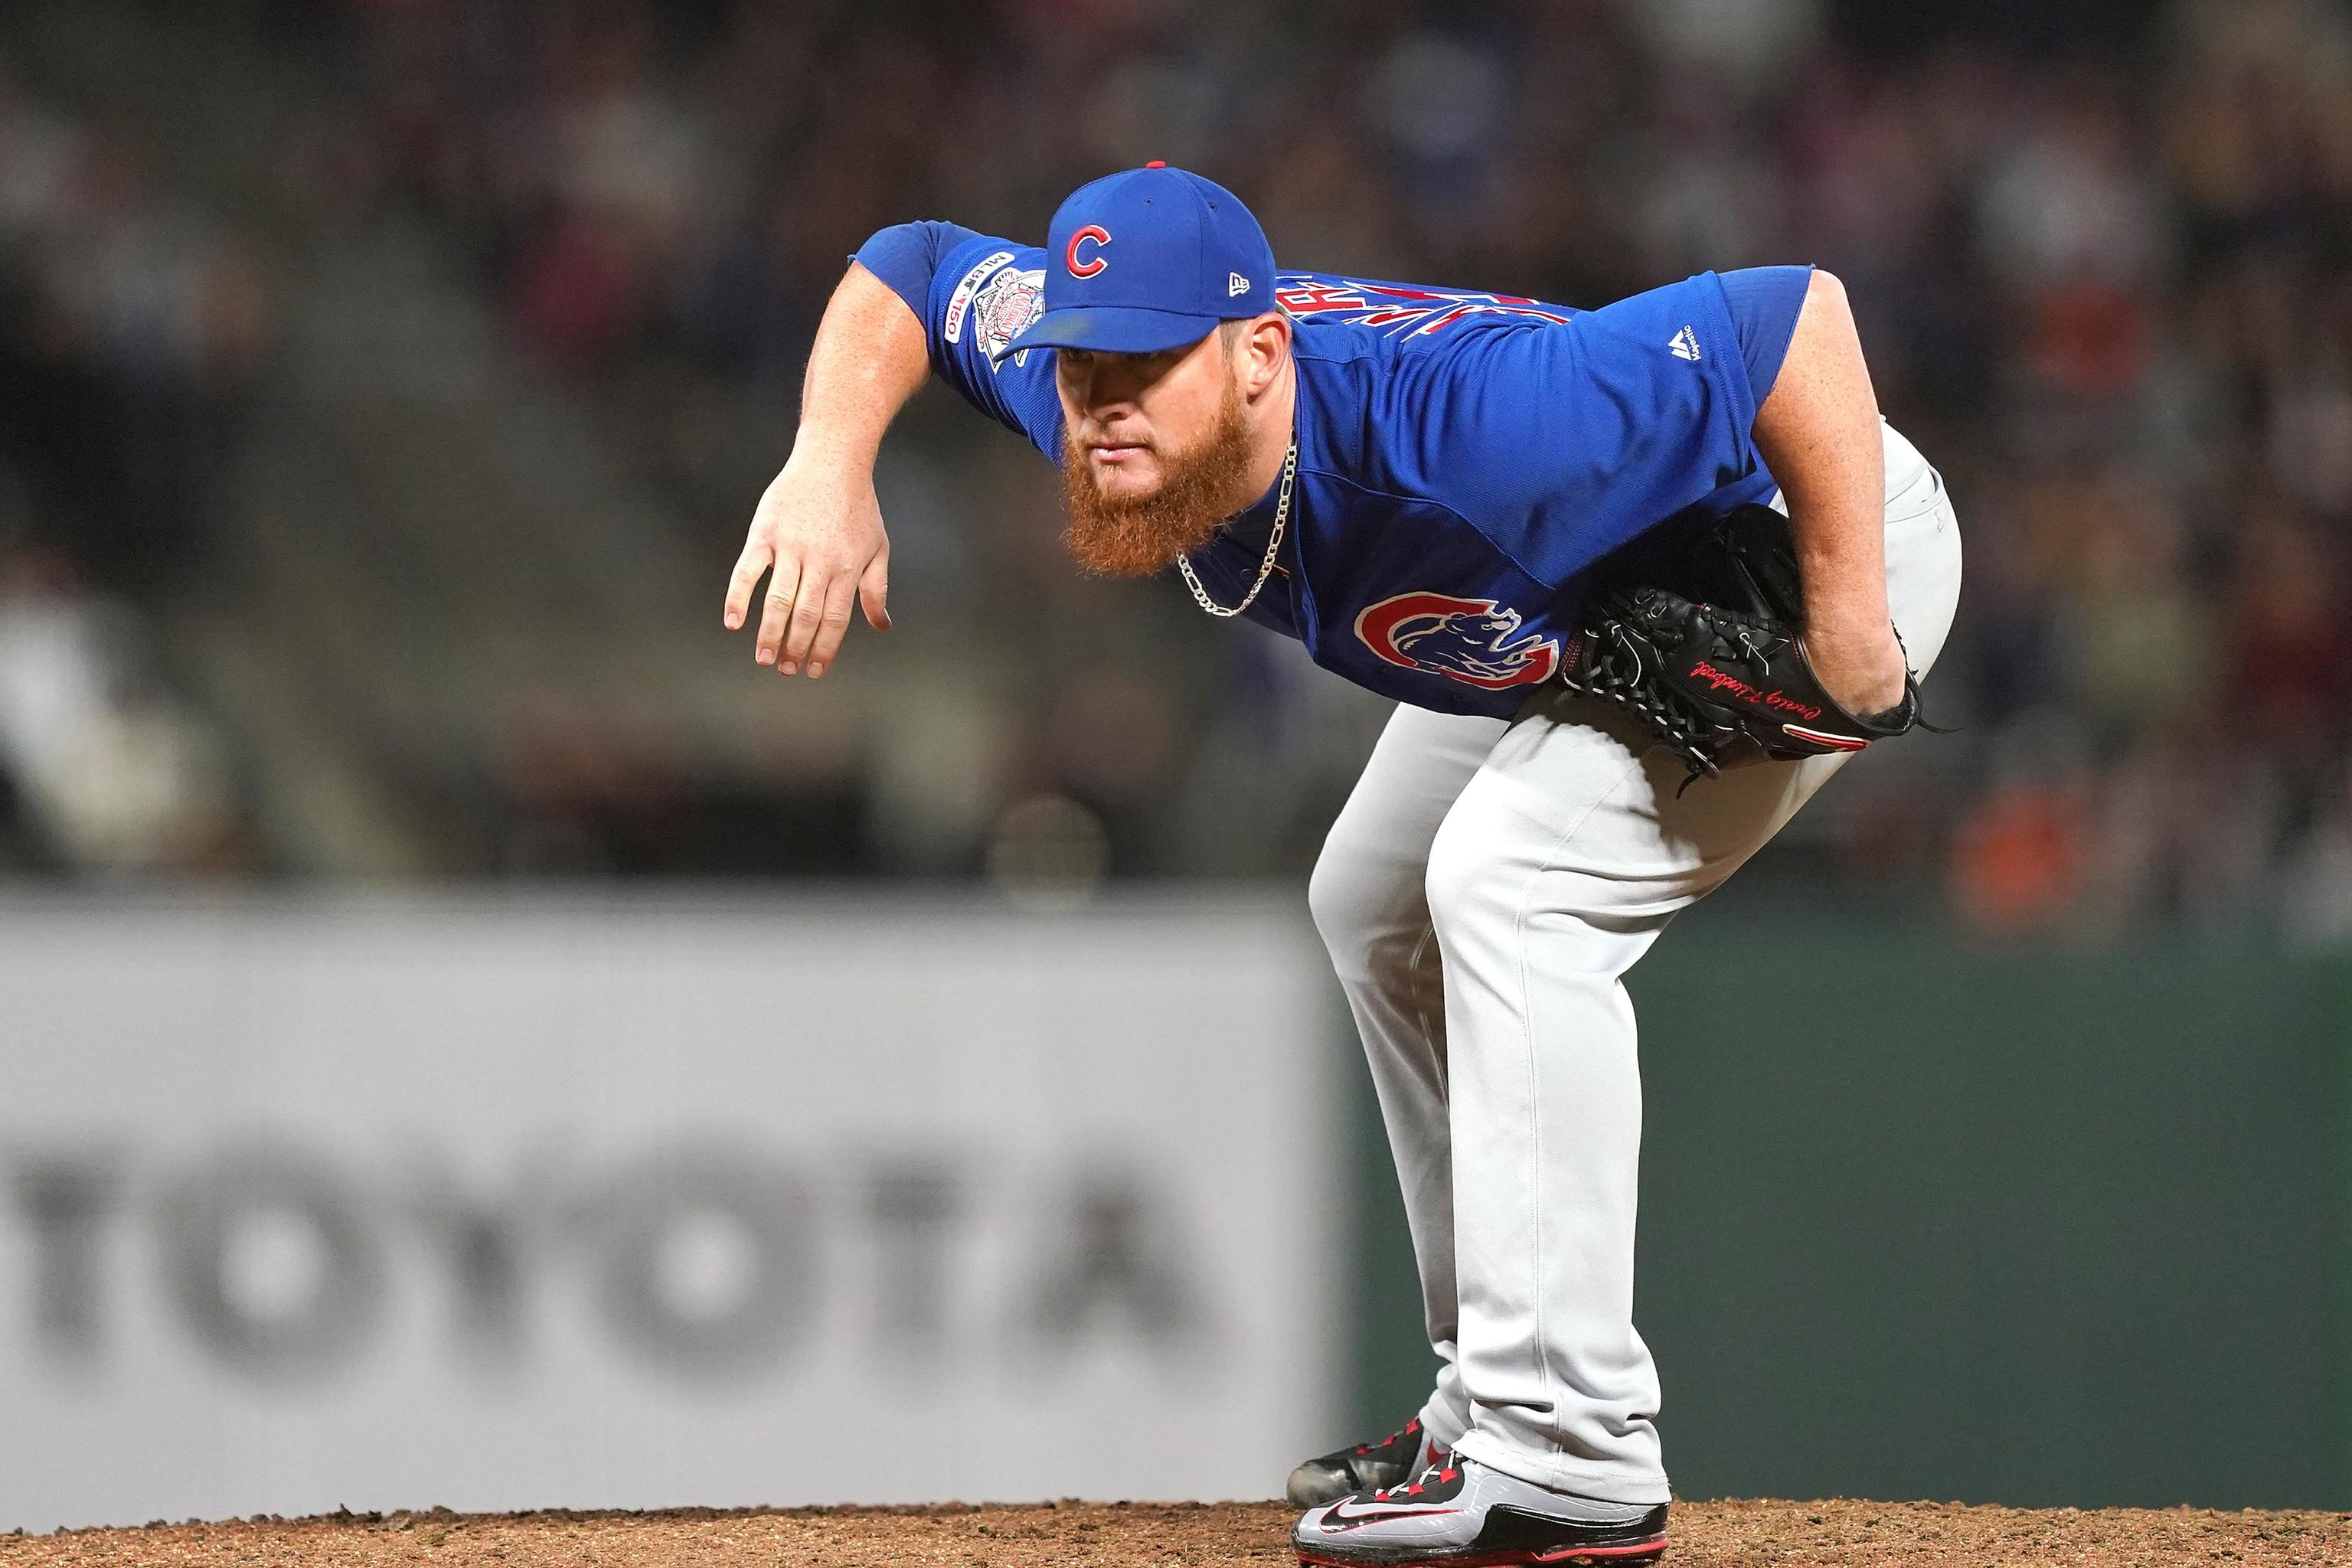 Craig Kimbrel of the Chicago Cubs poses during Photo Day on Tuesday